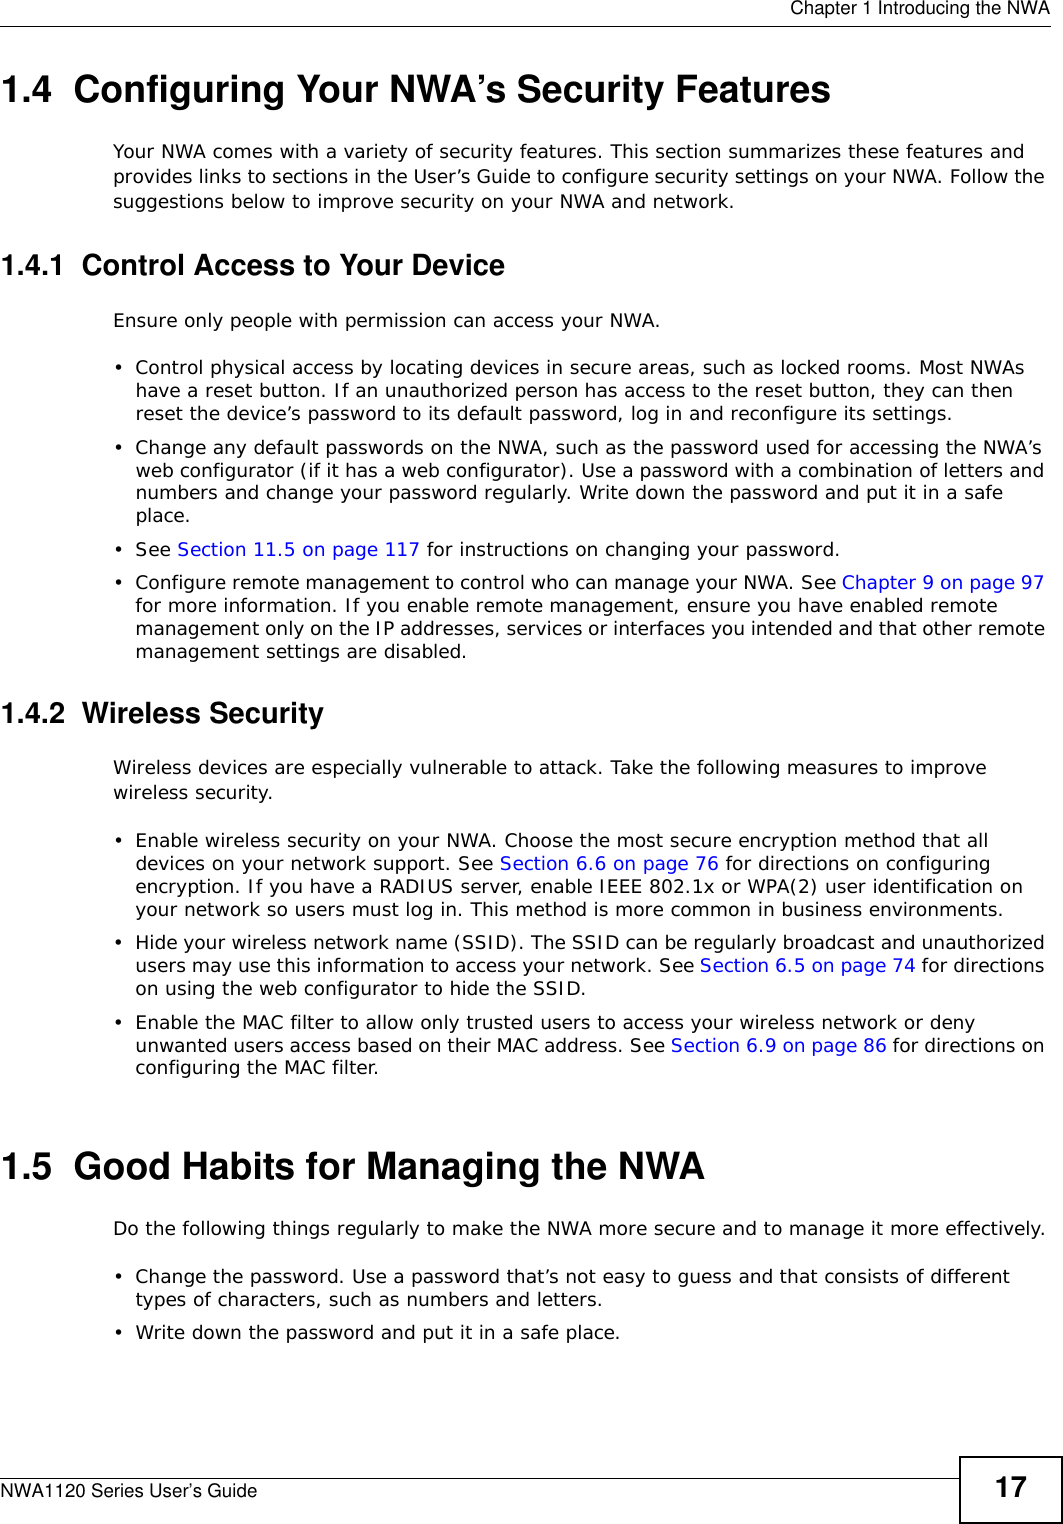  Chapter 1 Introducing the NWANWA1120 Series User’s Guide 171.4  Configuring Your NWA’s Security FeaturesYour NWA comes with a variety of security features. This section summarizes these features and provides links to sections in the User’s Guide to configure security settings on your NWA. Follow the suggestions below to improve security on your NWA and network. 1.4.1  Control Access to Your DeviceEnsure only people with permission can access your NWA.• Control physical access by locating devices in secure areas, such as locked rooms. Most NWAs have a reset button. If an unauthorized person has access to the reset button, they can then reset the device’s password to its default password, log in and reconfigure its settings.• Change any default passwords on the NWA, such as the password used for accessing the NWA’s web configurator (if it has a web configurator). Use a password with a combination of letters and numbers and change your password regularly. Write down the password and put it in a safe place.•See Section 11.5 on page 117 for instructions on changing your password.• Configure remote management to control who can manage your NWA. See Chapter 9 on page 97 for more information. If you enable remote management, ensure you have enabled remote management only on the IP addresses, services or interfaces you intended and that other remote management settings are disabled.1.4.2  Wireless Security Wireless devices are especially vulnerable to attack. Take the following measures to improve wireless security.• Enable wireless security on your NWA. Choose the most secure encryption method that all devices on your network support. See Section 6.6 on page 76 for directions on configuring encryption. If you have a RADIUS server, enable IEEE 802.1x or WPA(2) user identification on your network so users must log in. This method is more common in business environments.   • Hide your wireless network name (SSID). The SSID can be regularly broadcast and unauthorized users may use this information to access your network. See Section 6.5 on page 74 for directions on using the web configurator to hide the SSID. • Enable the MAC filter to allow only trusted users to access your wireless network or deny unwanted users access based on their MAC address. See Section 6.9 on page 86 for directions on configuring the MAC filter. 1.5  Good Habits for Managing the NWADo the following things regularly to make the NWA more secure and to manage it more effectively.• Change the password. Use a password that’s not easy to guess and that consists of different types of characters, such as numbers and letters.• Write down the password and put it in a safe place.